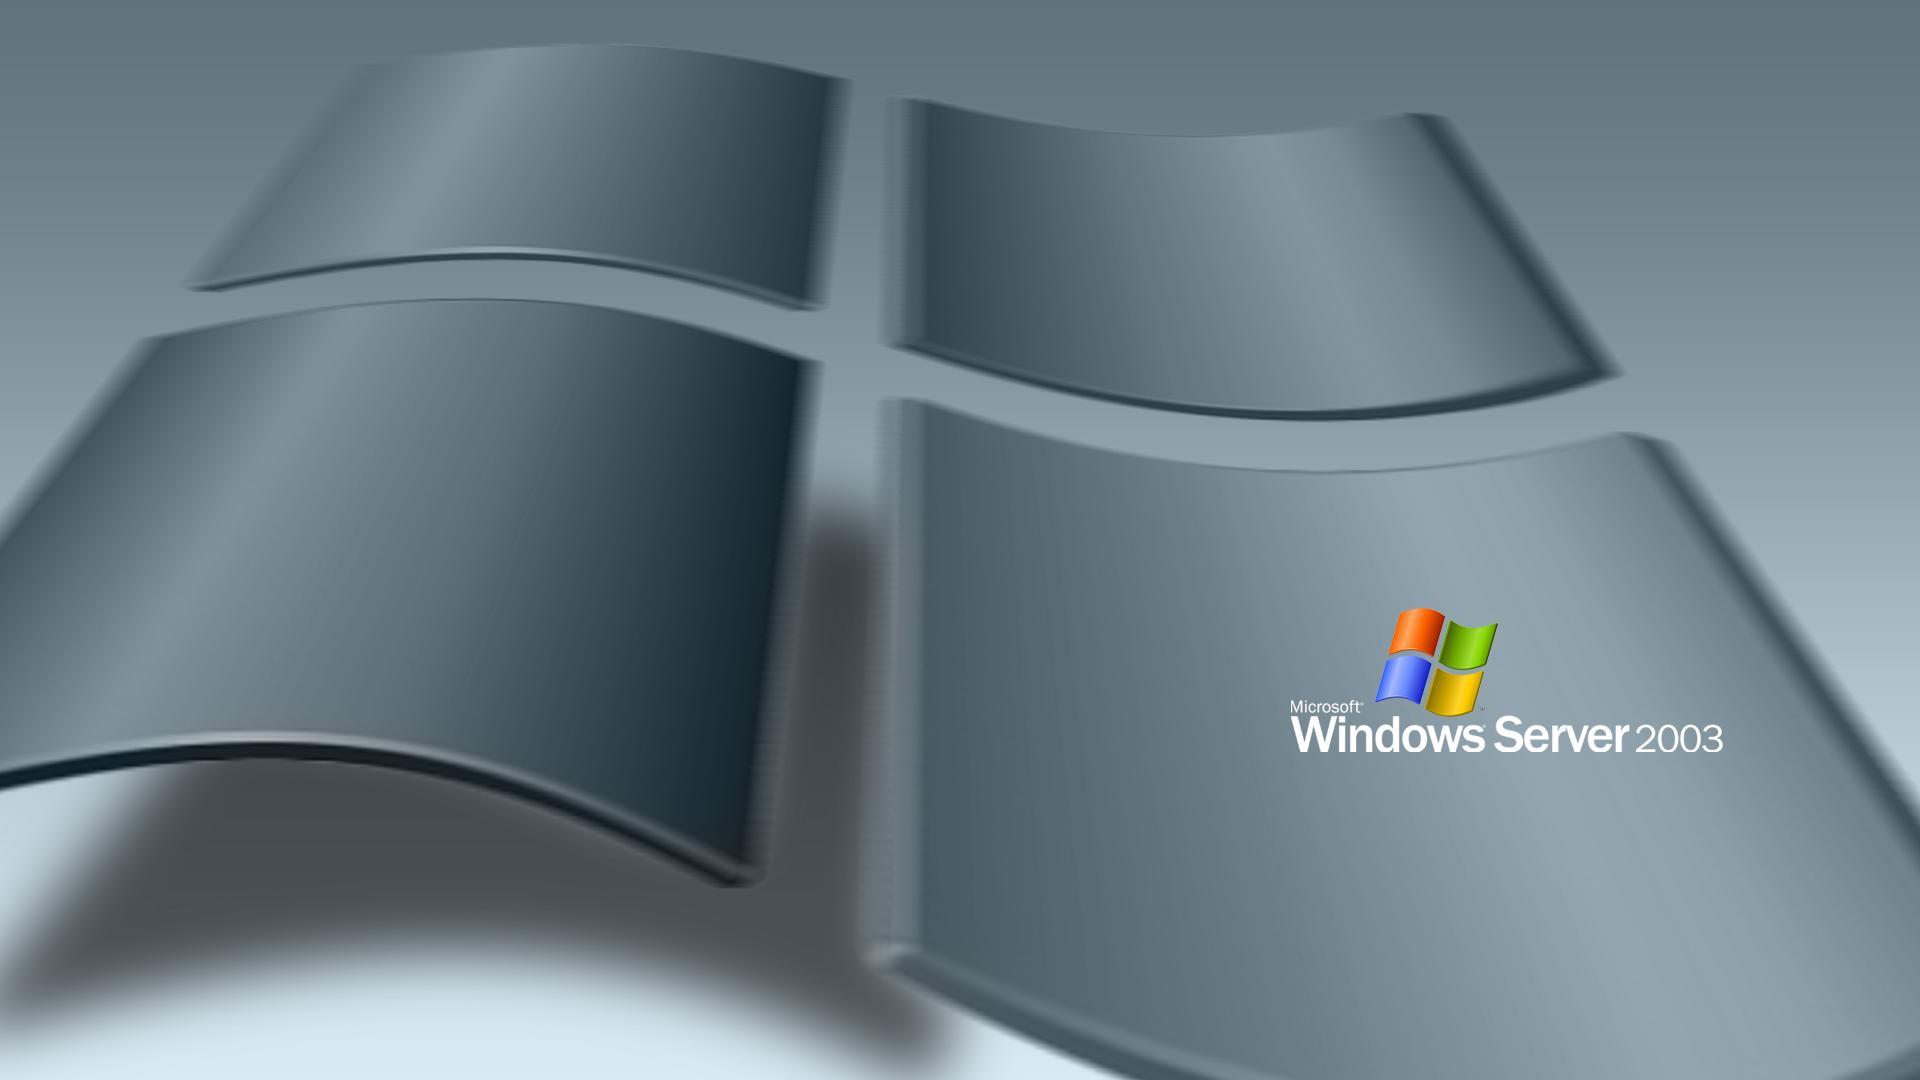 View Topic's HQ Windows XP 2003 Edition Background